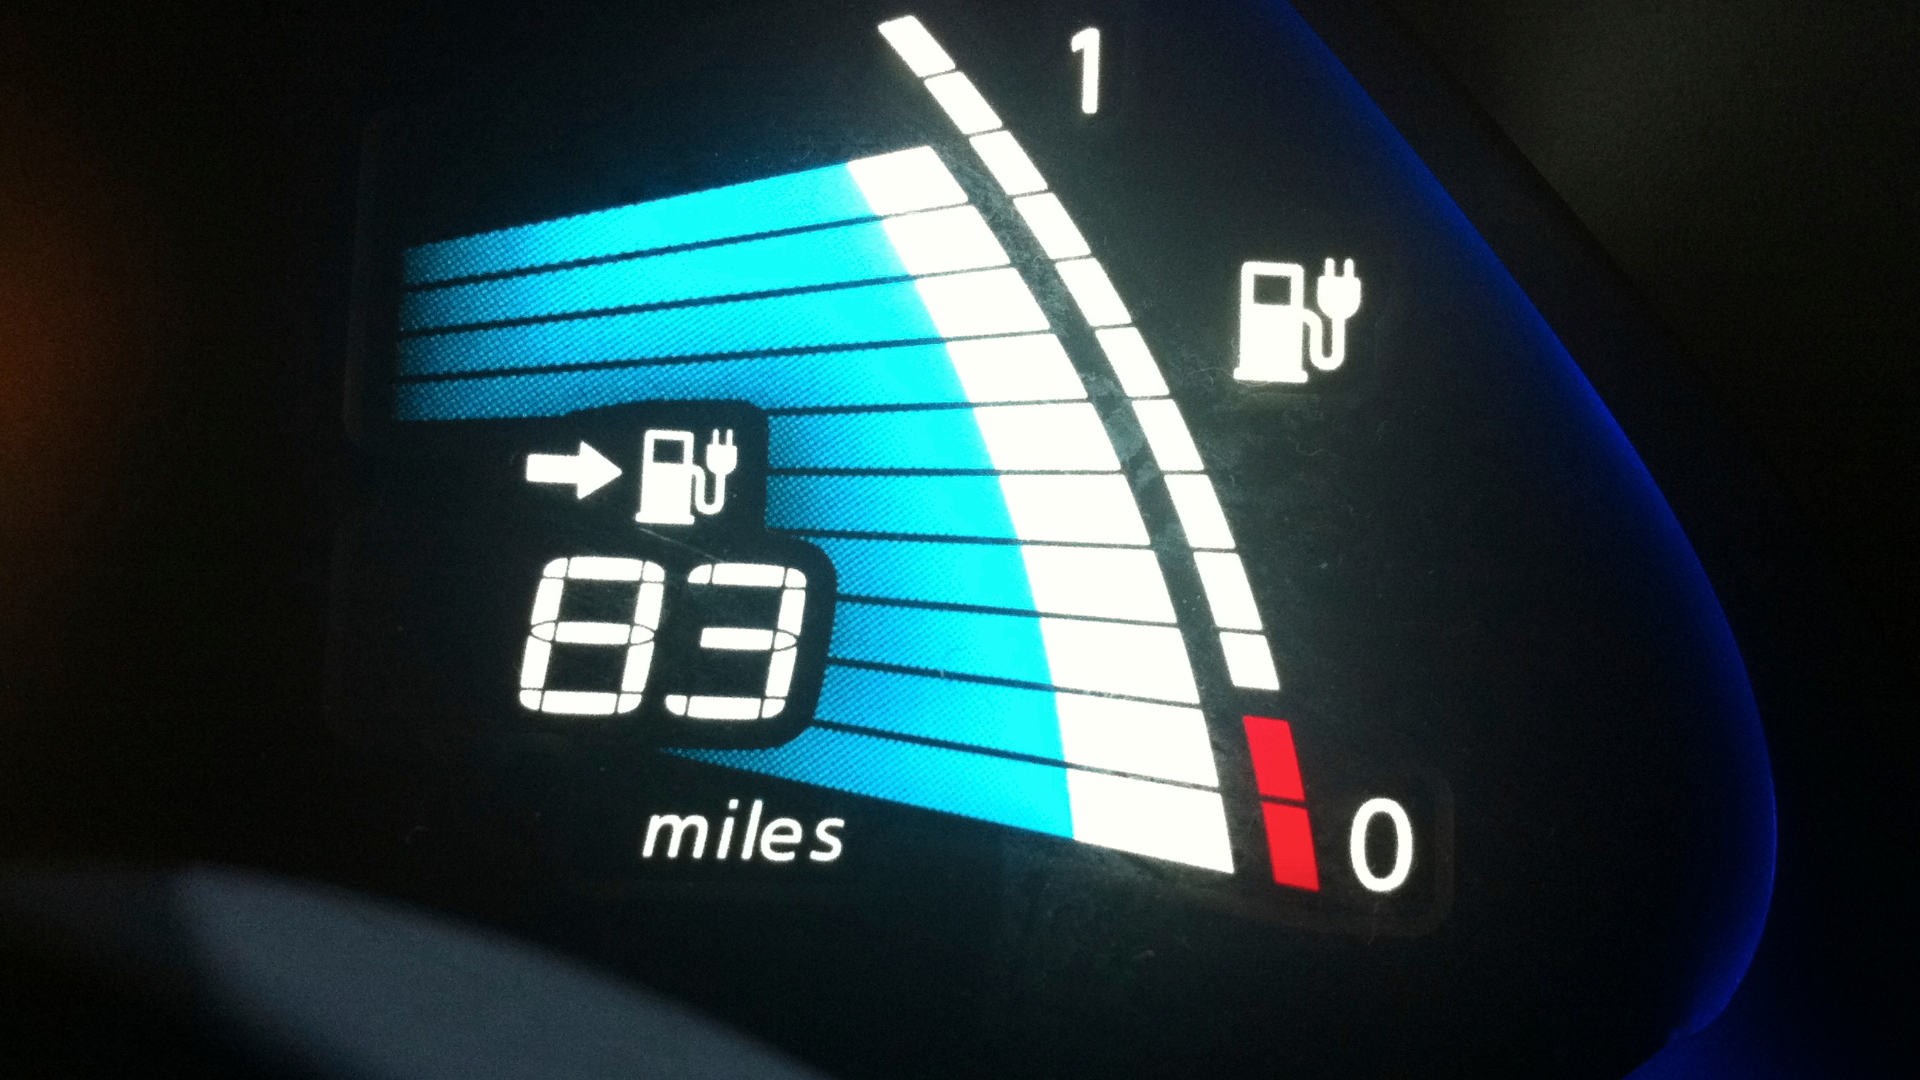 2011 Nissan Leaf State of Charge and Miles remaining